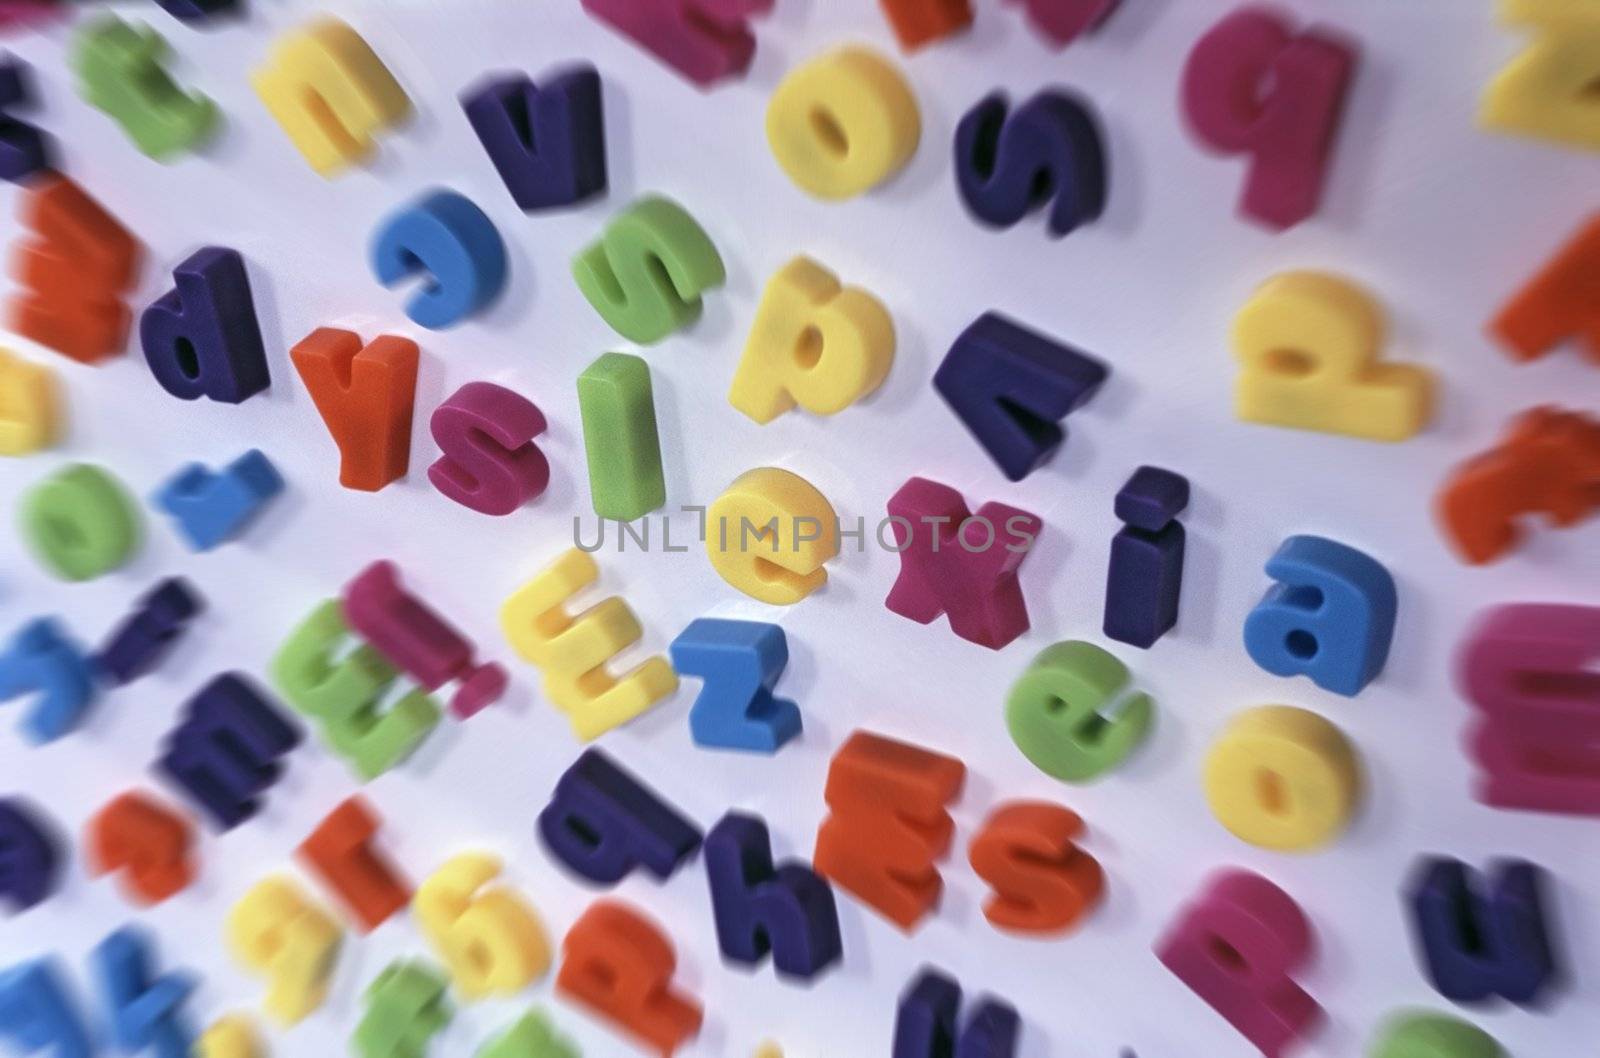 Dyslexia spelt out in a jumble of blurred letters